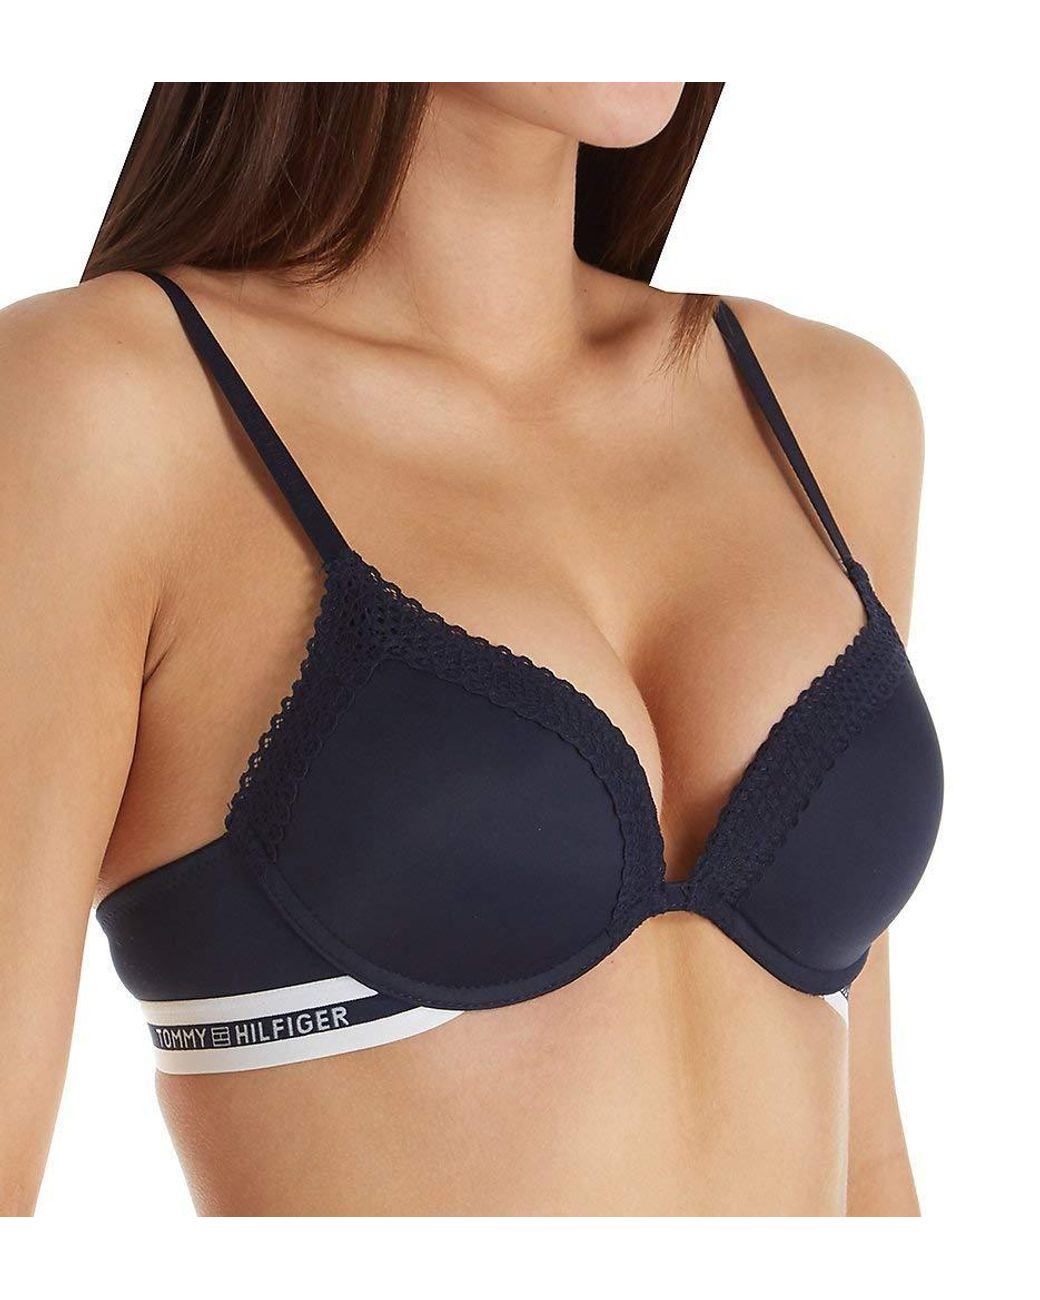 TOMAS MARSHAL Push Up Bras for Women - Everyday Padded Underwire